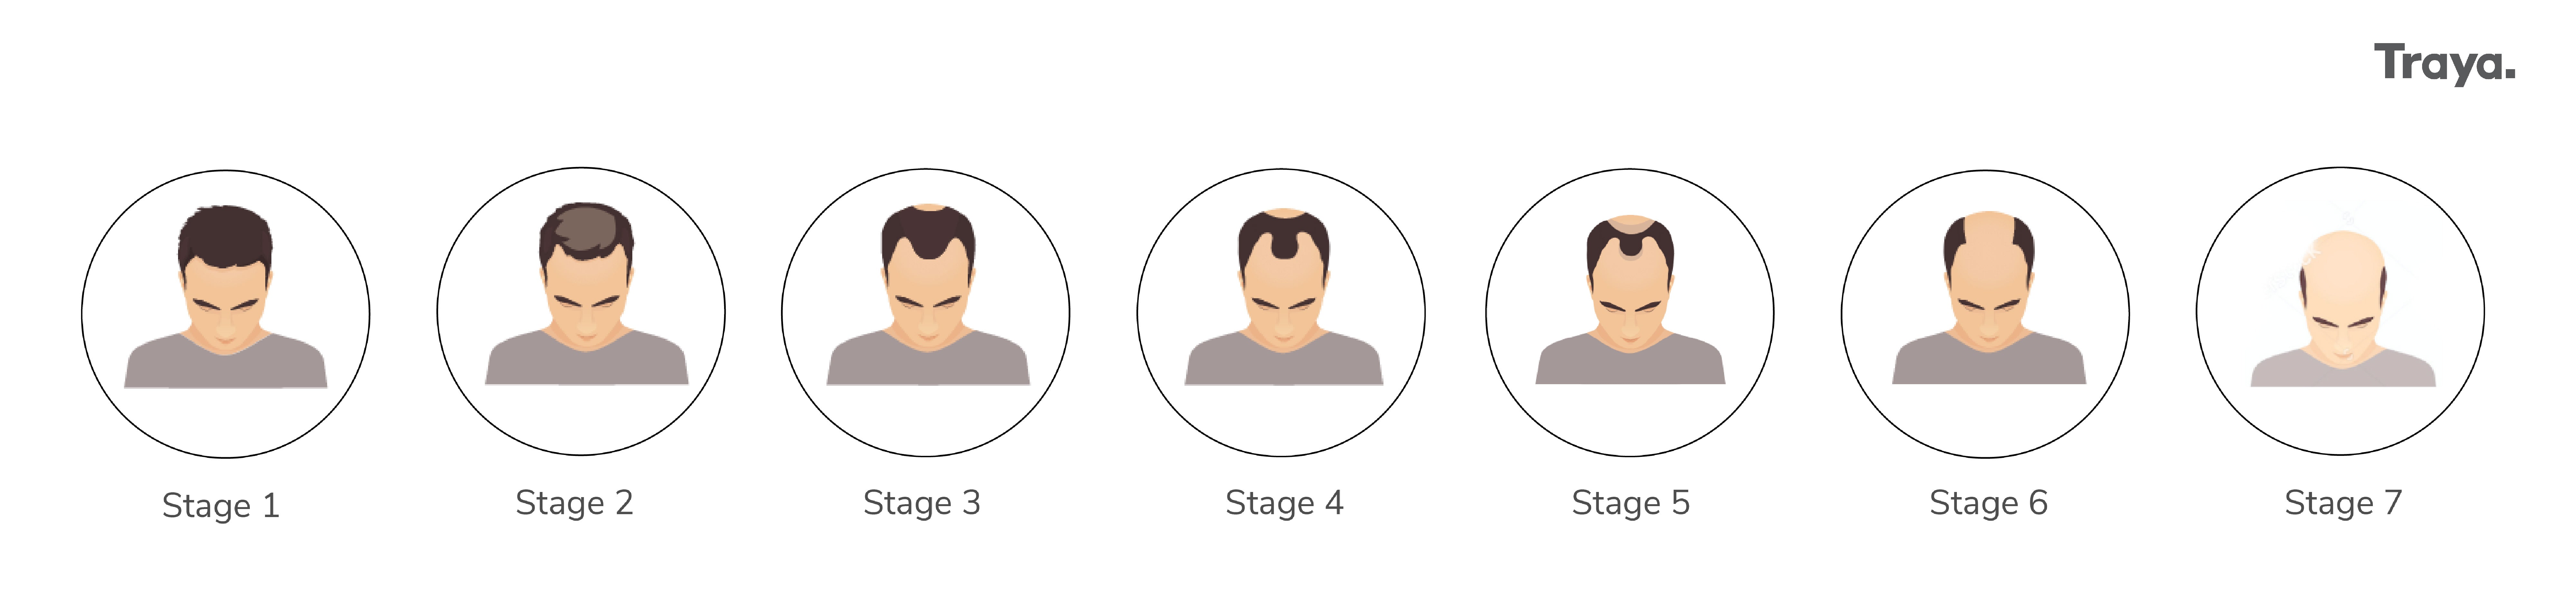 stages of hair fall in men